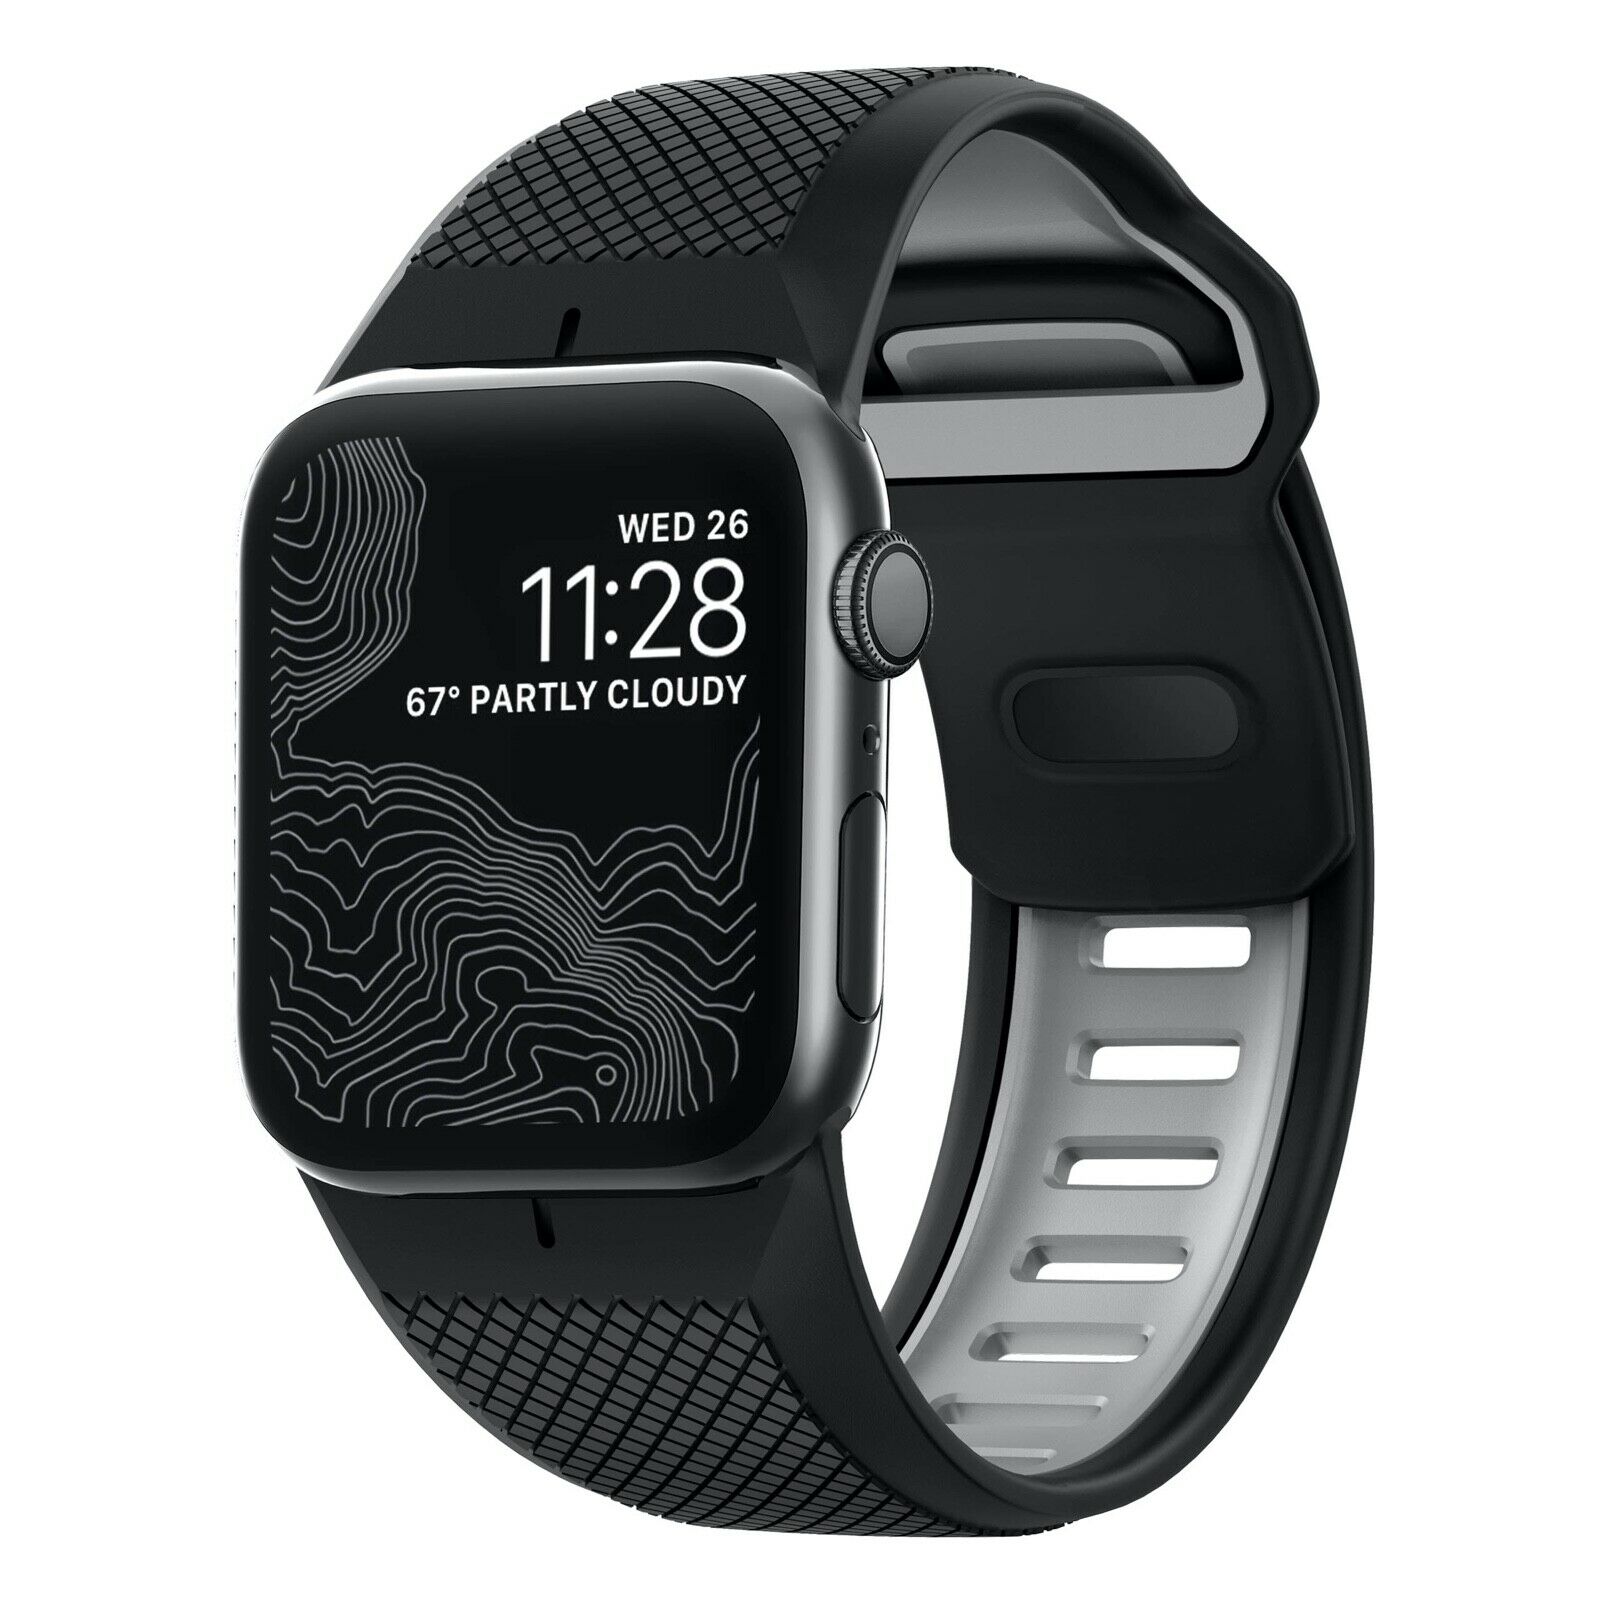 NEW Nomad Silicone Sport Band Apple Watch 42mm 44mm BLACK SERIES 1 2 3 4 5 6 SE